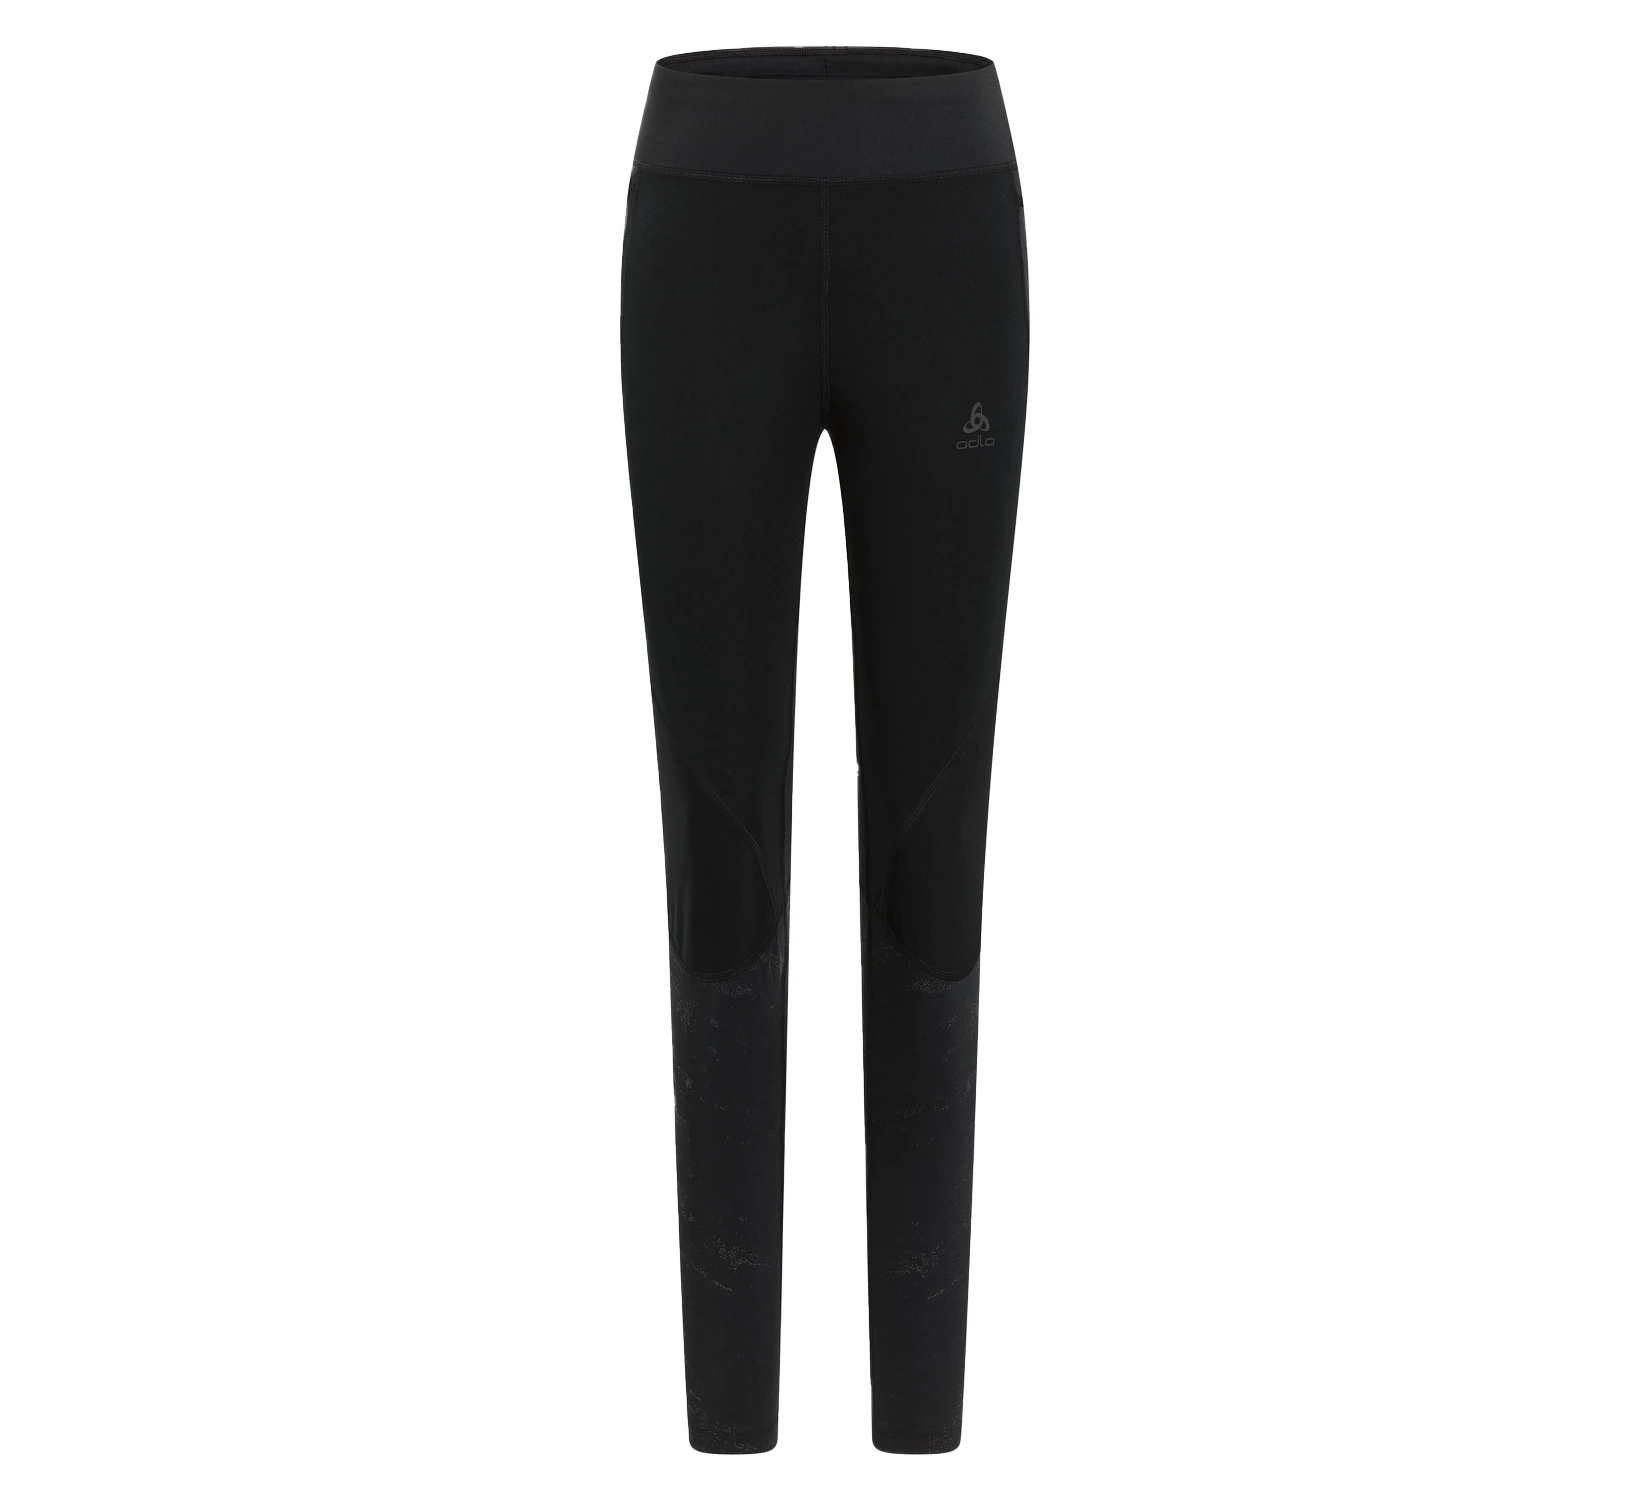 Odlo Tights Zeroweight Warm Reflective - Running tights Women's, Buy  online